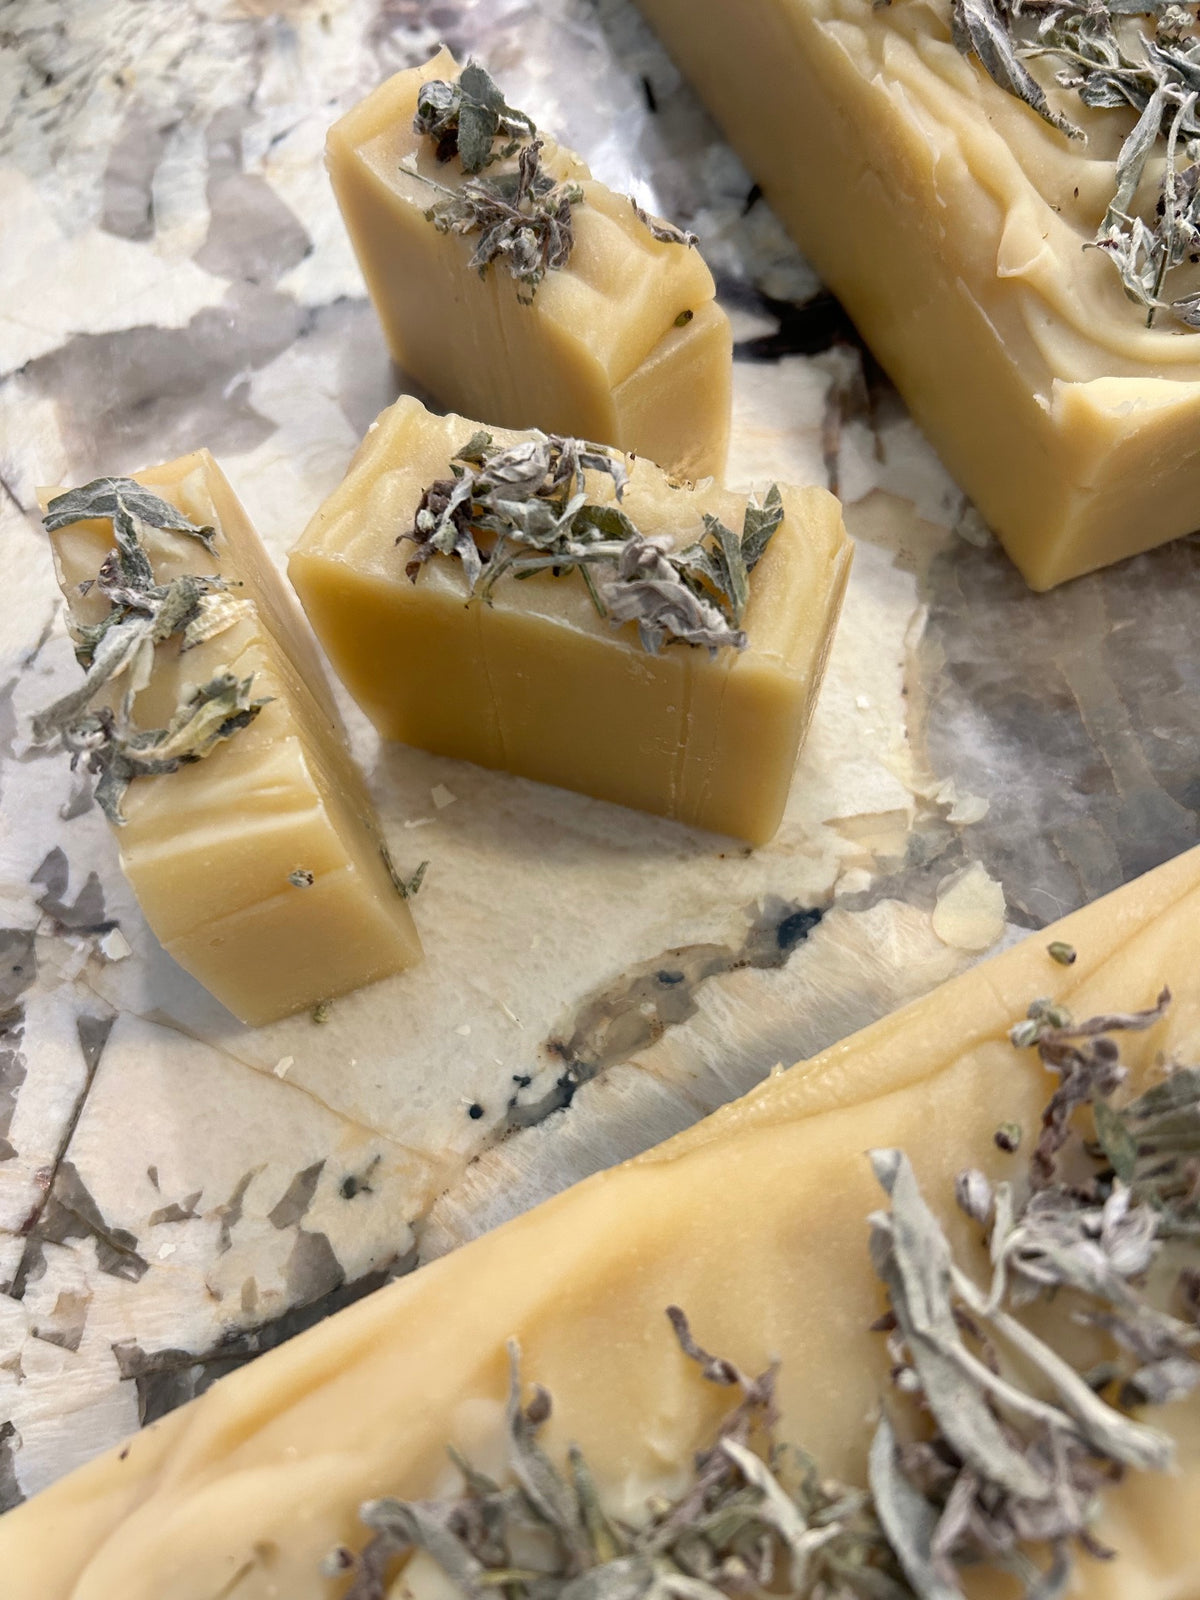 Tallow and Tallow Soap: More Urban Homesteading - June 1